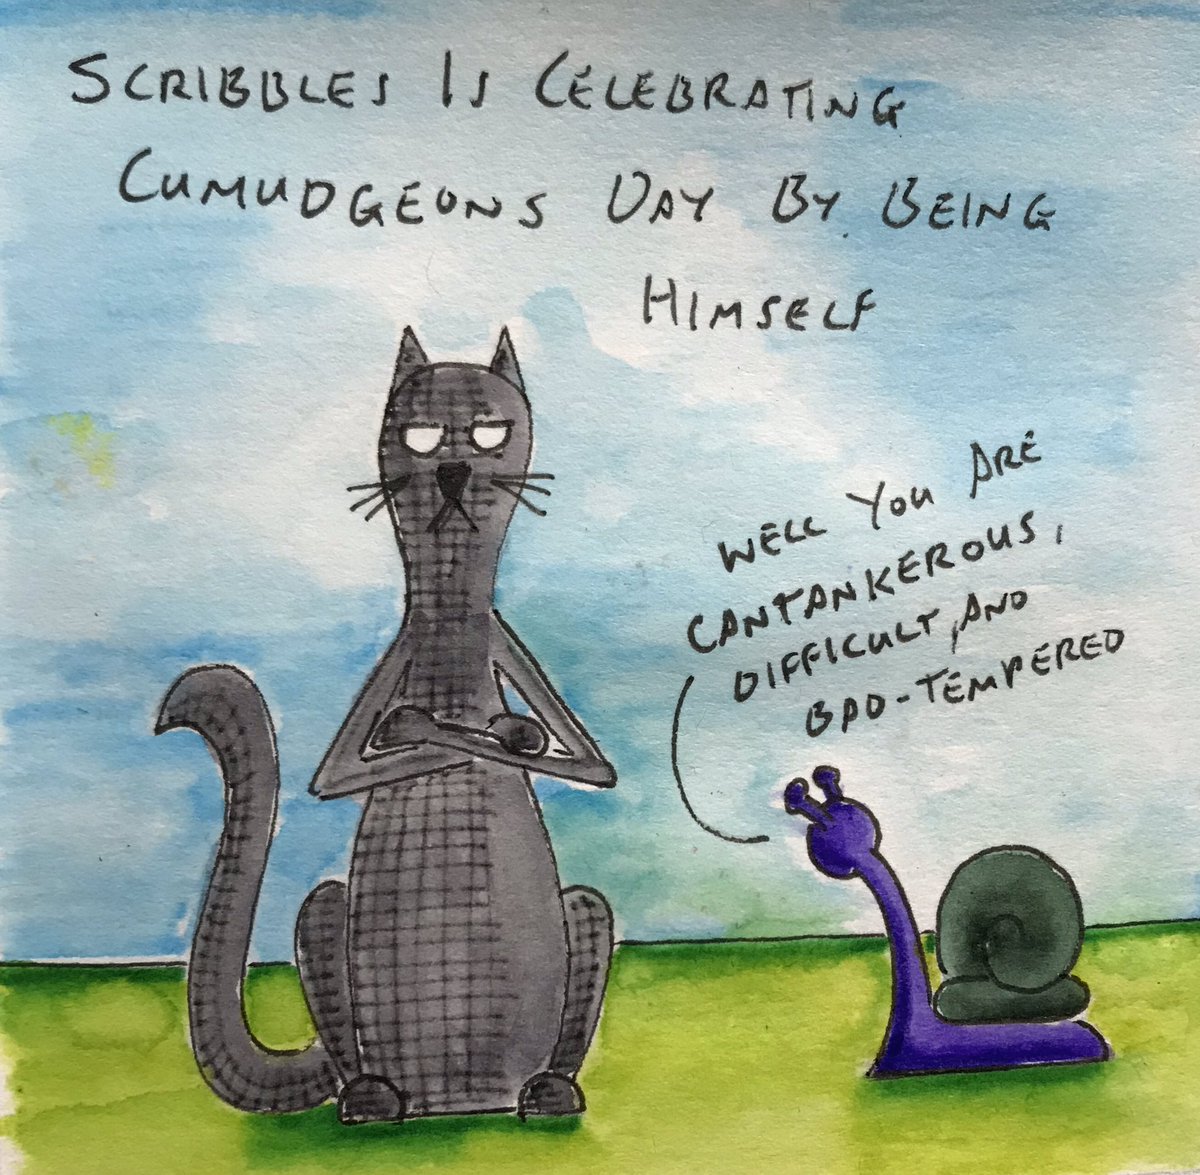 #CumudgeonsDay #Cumudgeon #CantankerousCat #Cantankerous #CatsOnTwitter #CatsOfTwitter #ThisIsScribbles